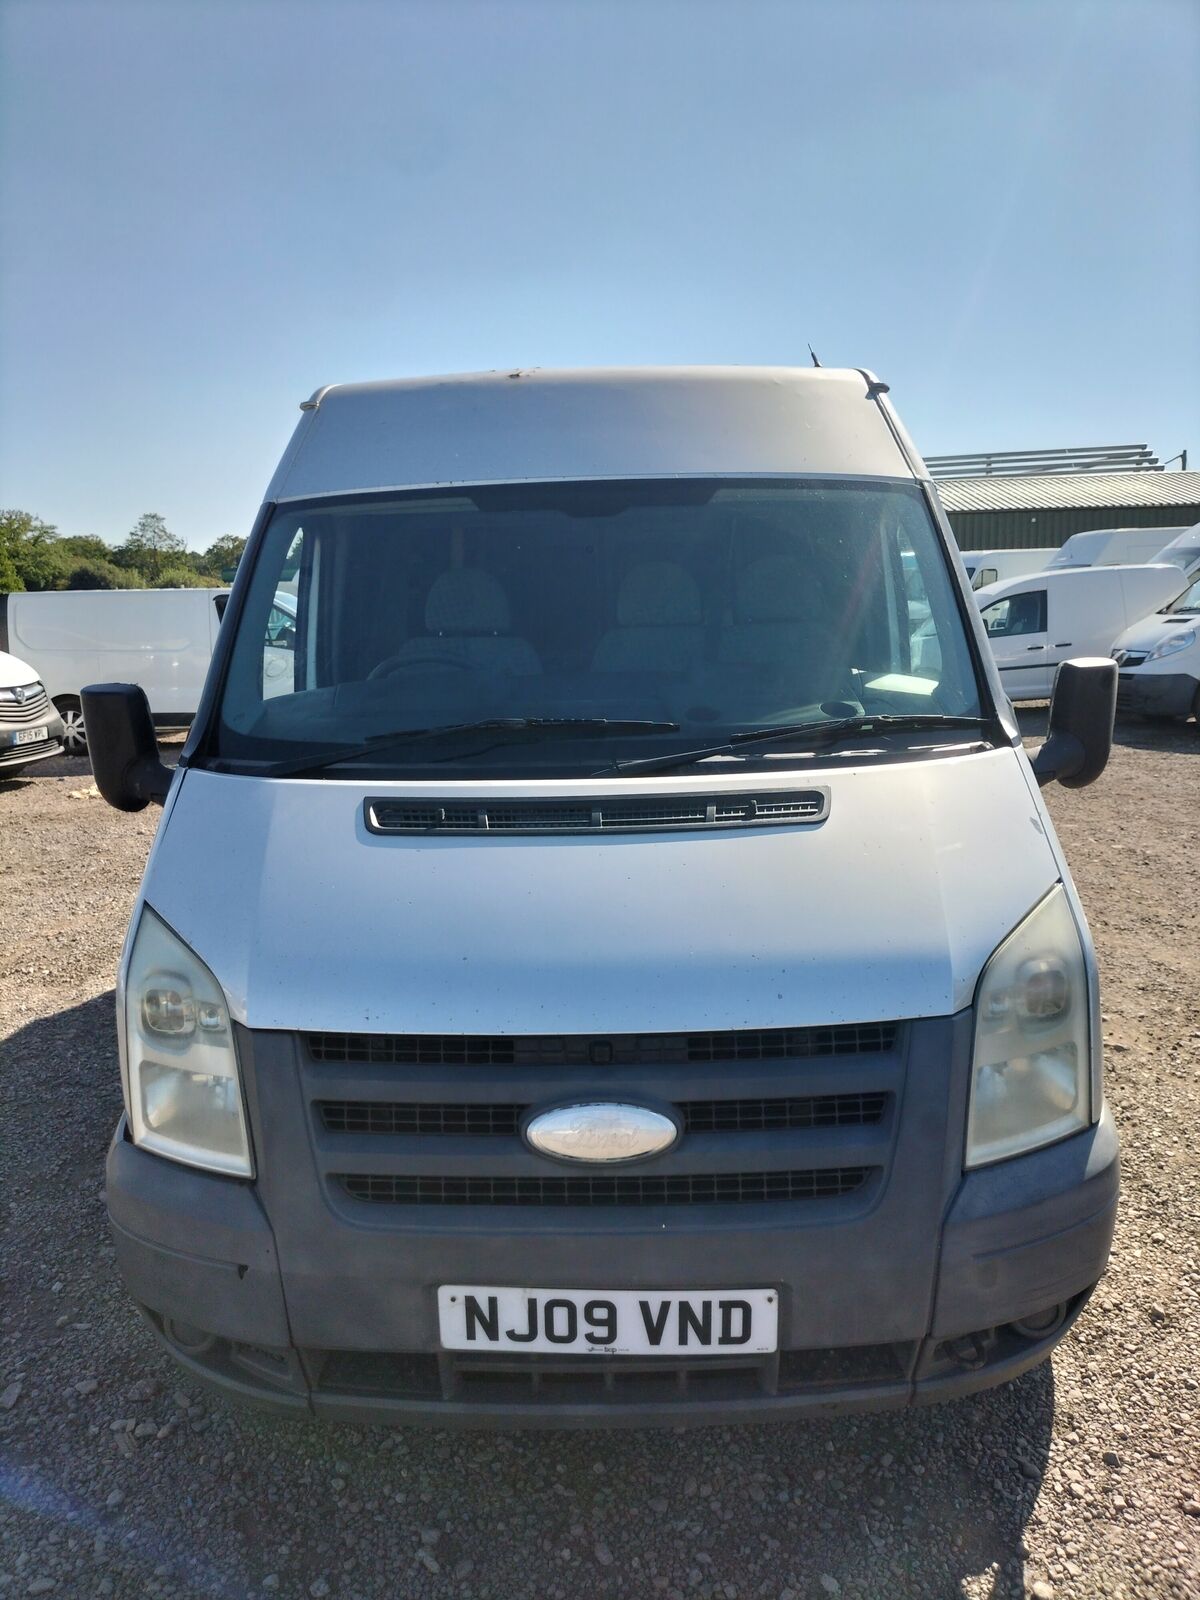 Bid on SILVER BULLET: FORD TRANSIT 350 MEDIUM ROOF VAN TDCI 100PS (NO VAT ON HAMMER)- Buy &amp; Sell on Auction with EAMA Group